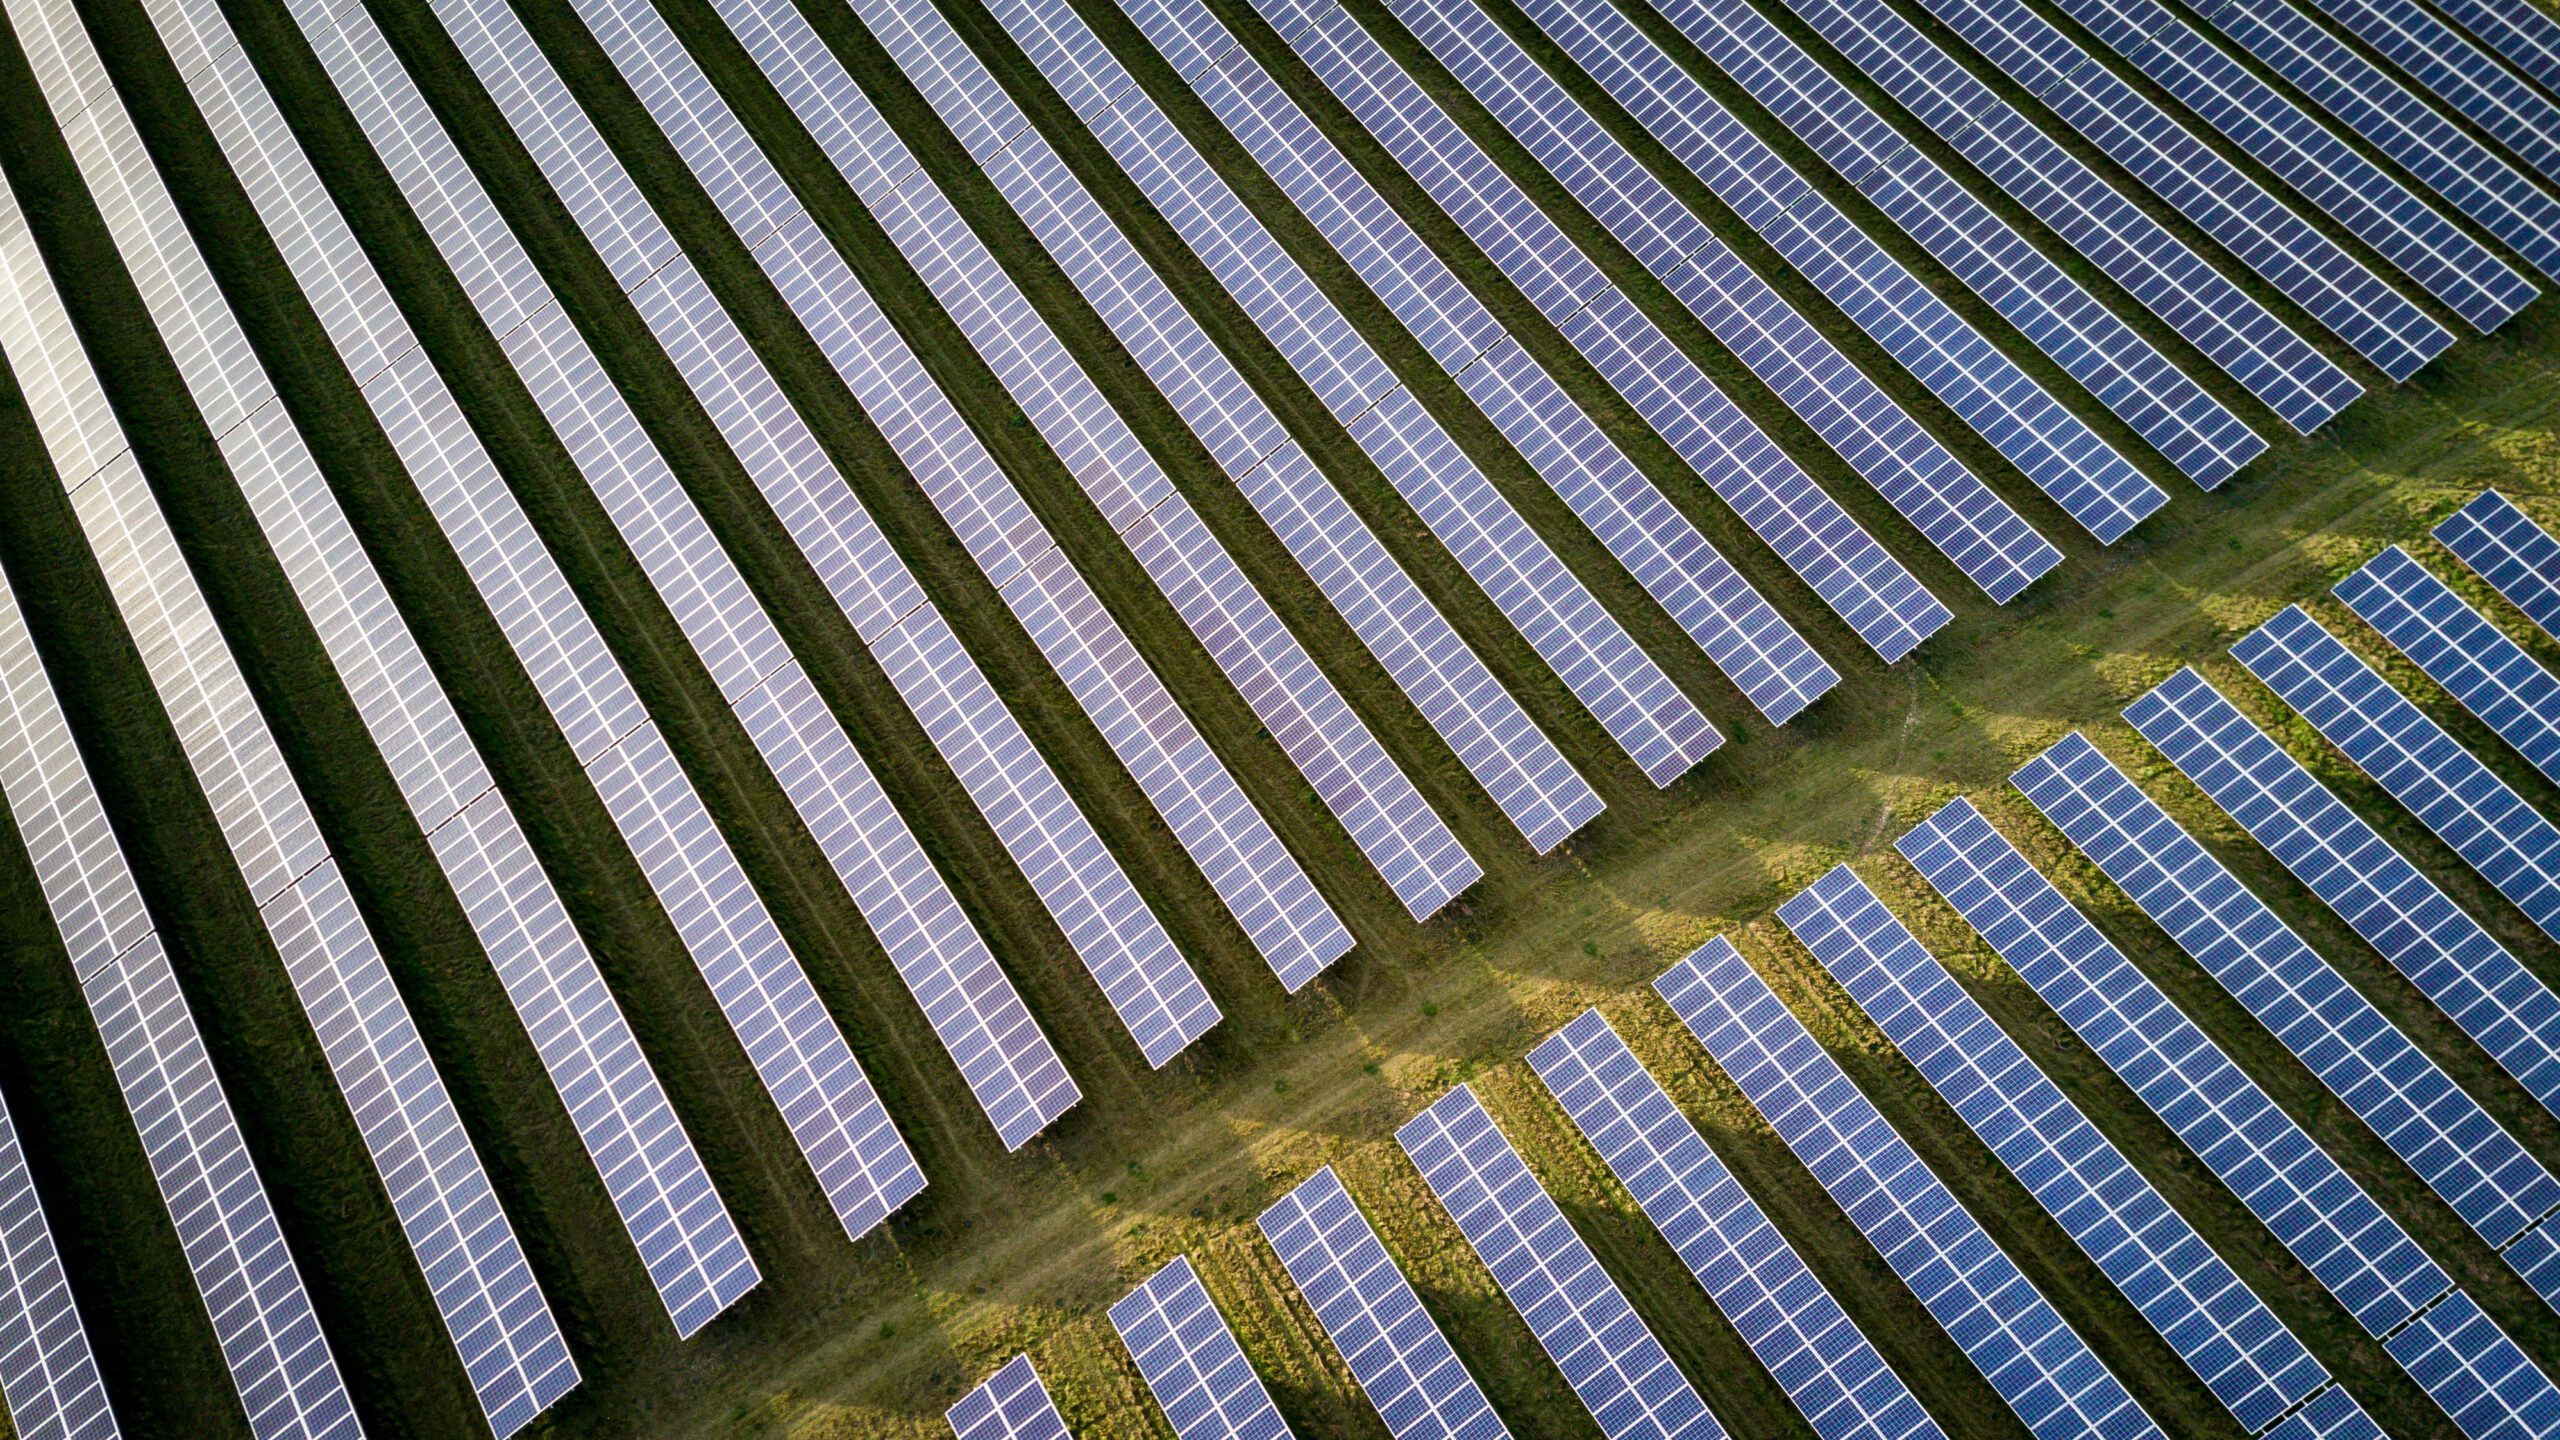 Solar Energy Accounted for Half of All Global Energy Capacity Additions in 2021